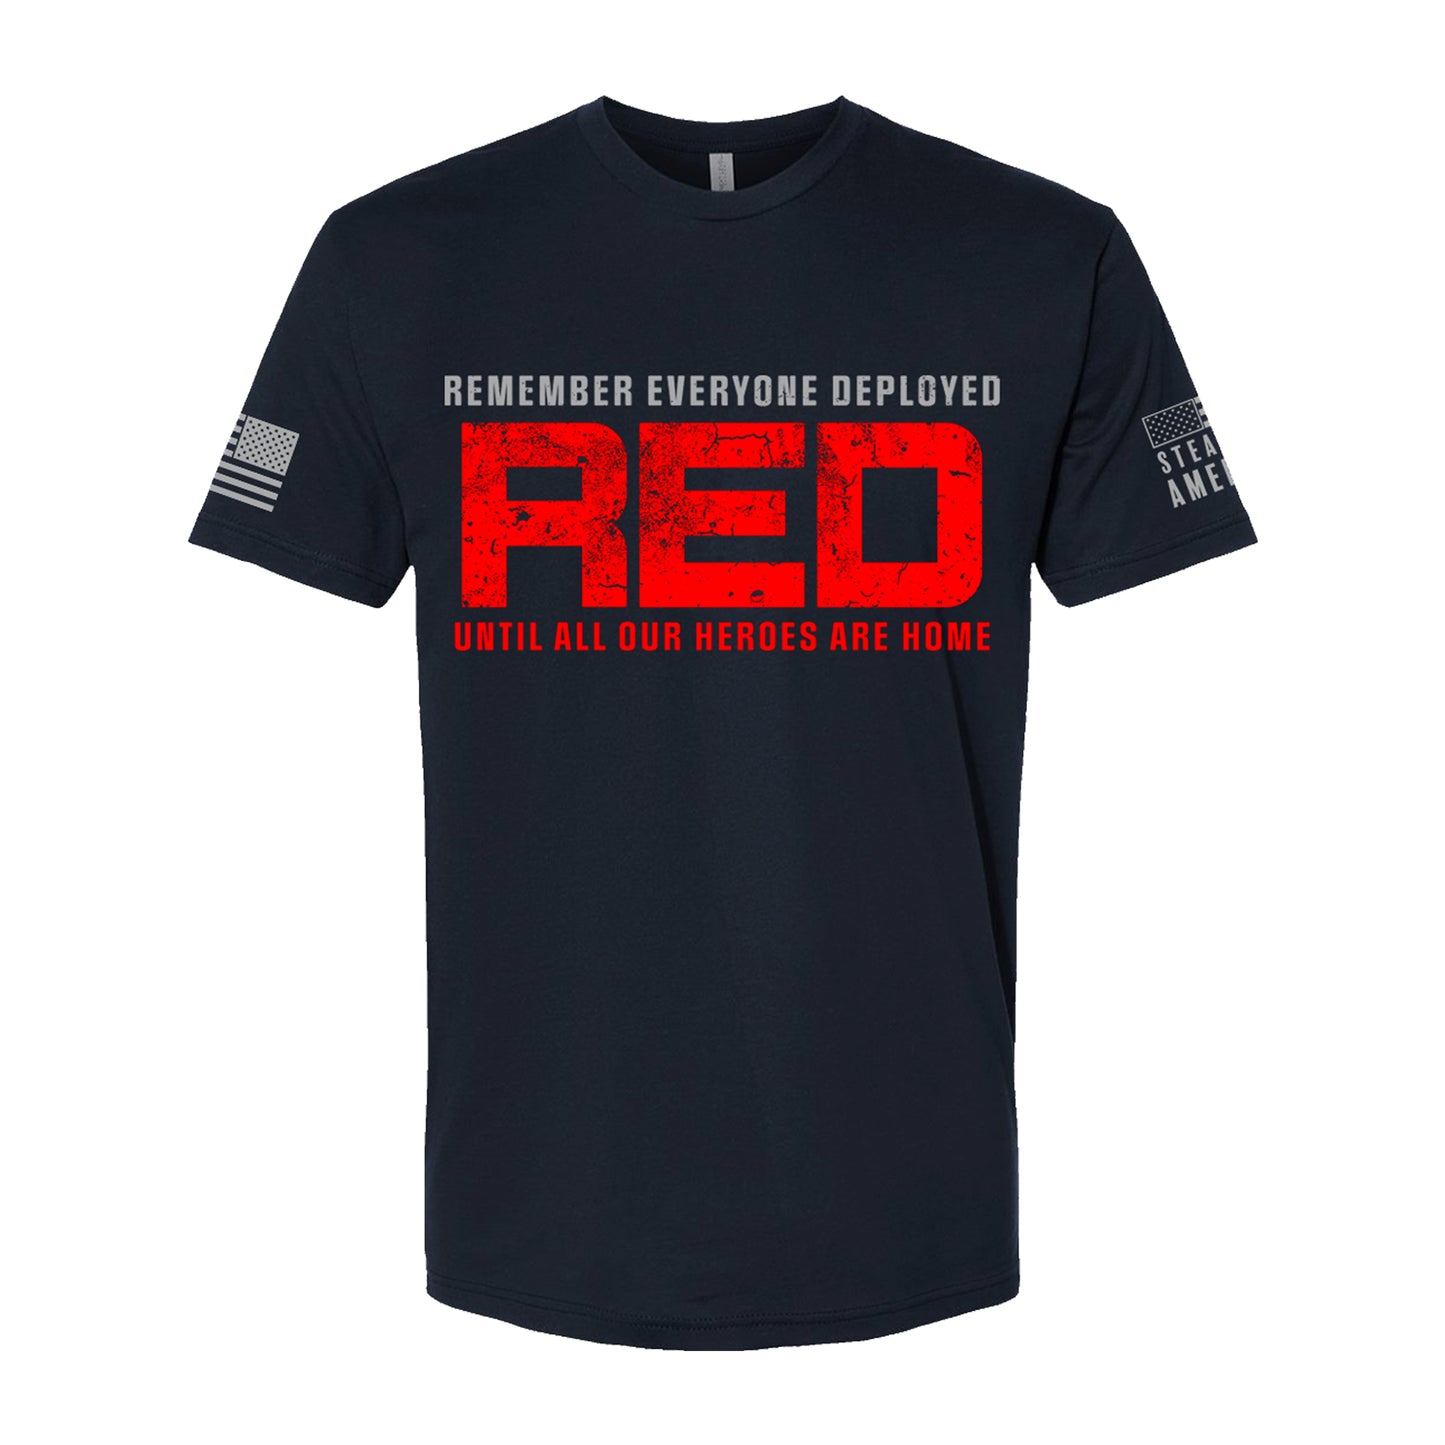 Remember Everyone Deployed (R.E.D.) - Until All Our Heroes Are Home, Short Sleeve, Navy